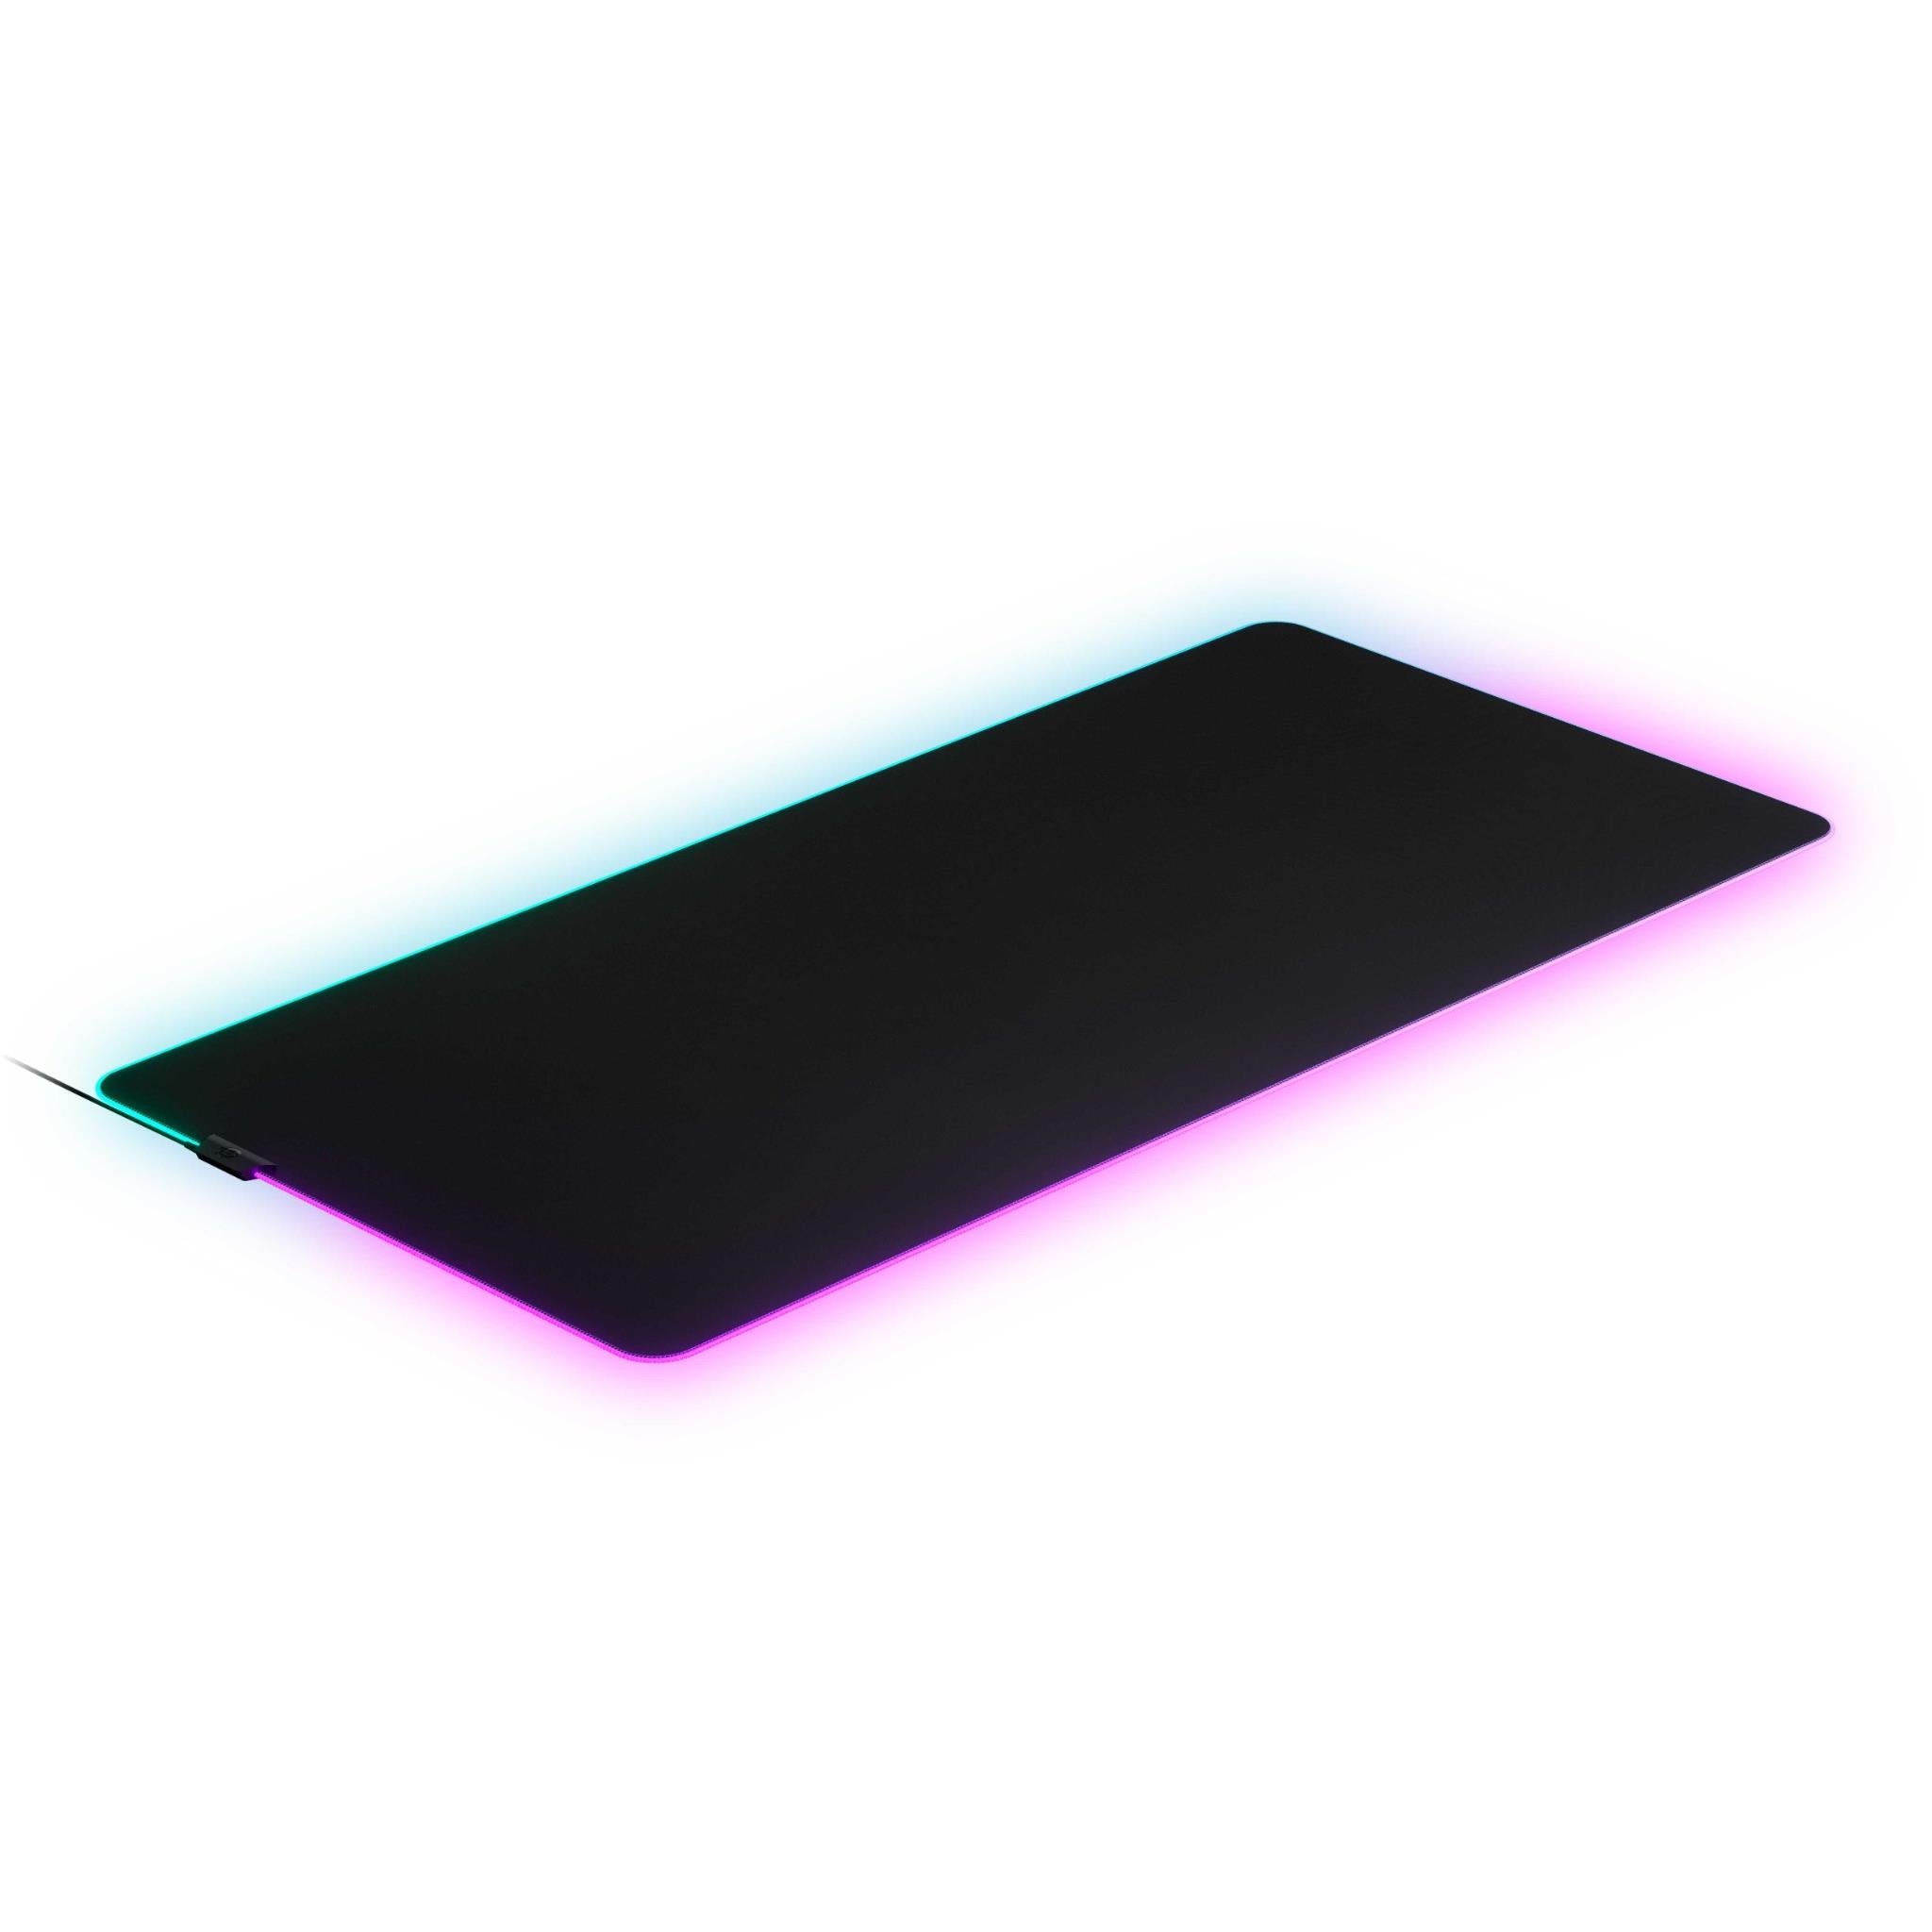 steelseries qck 3x-large prism 2-zone rgb illumination gaming mouse pad